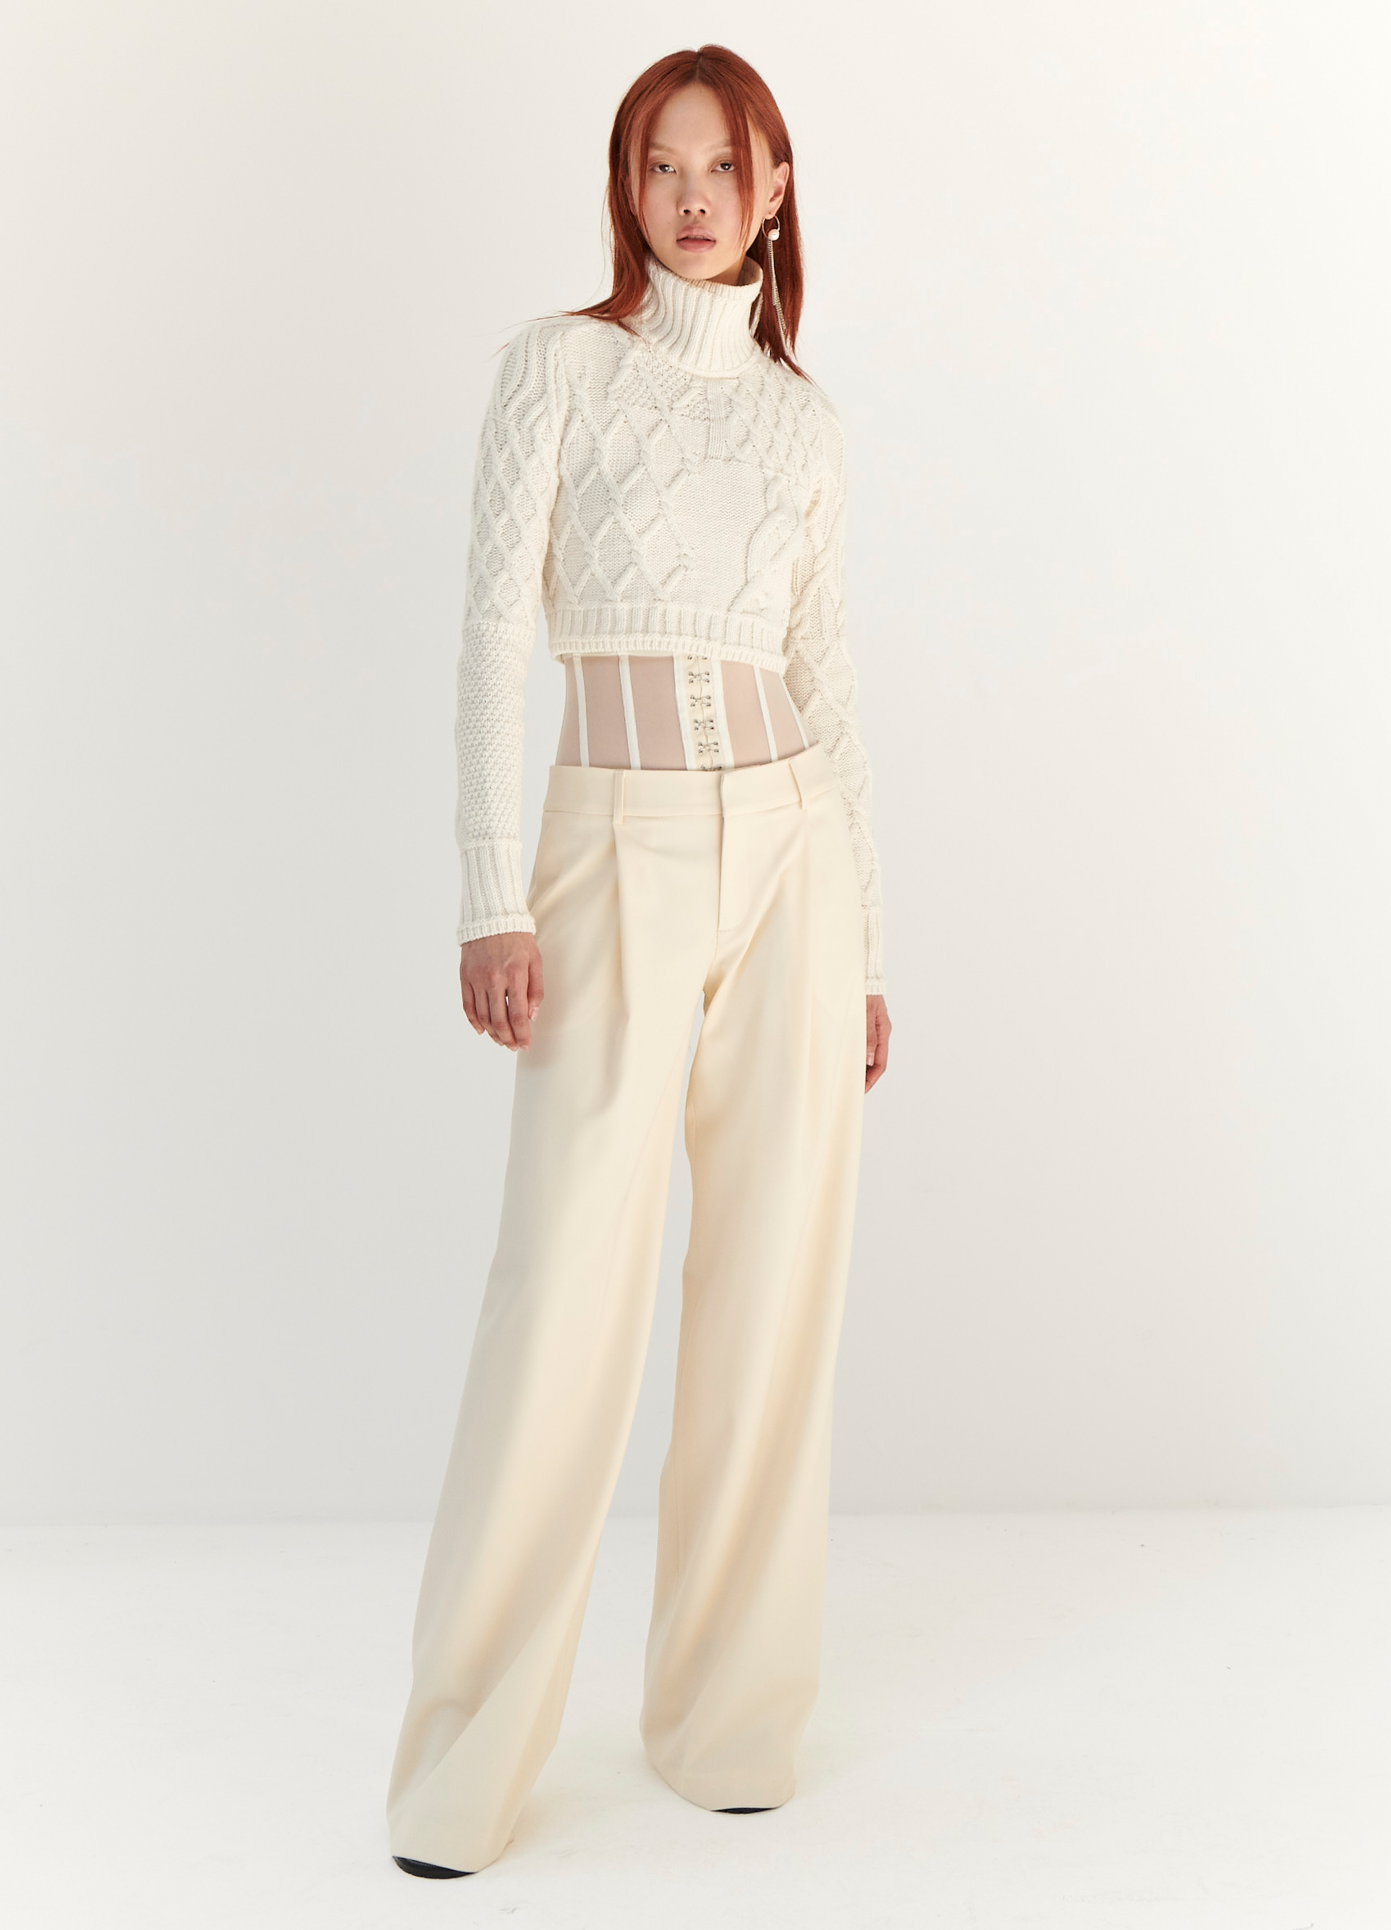 MONSE Cropped Cable Sweater in Ivory on model full front view